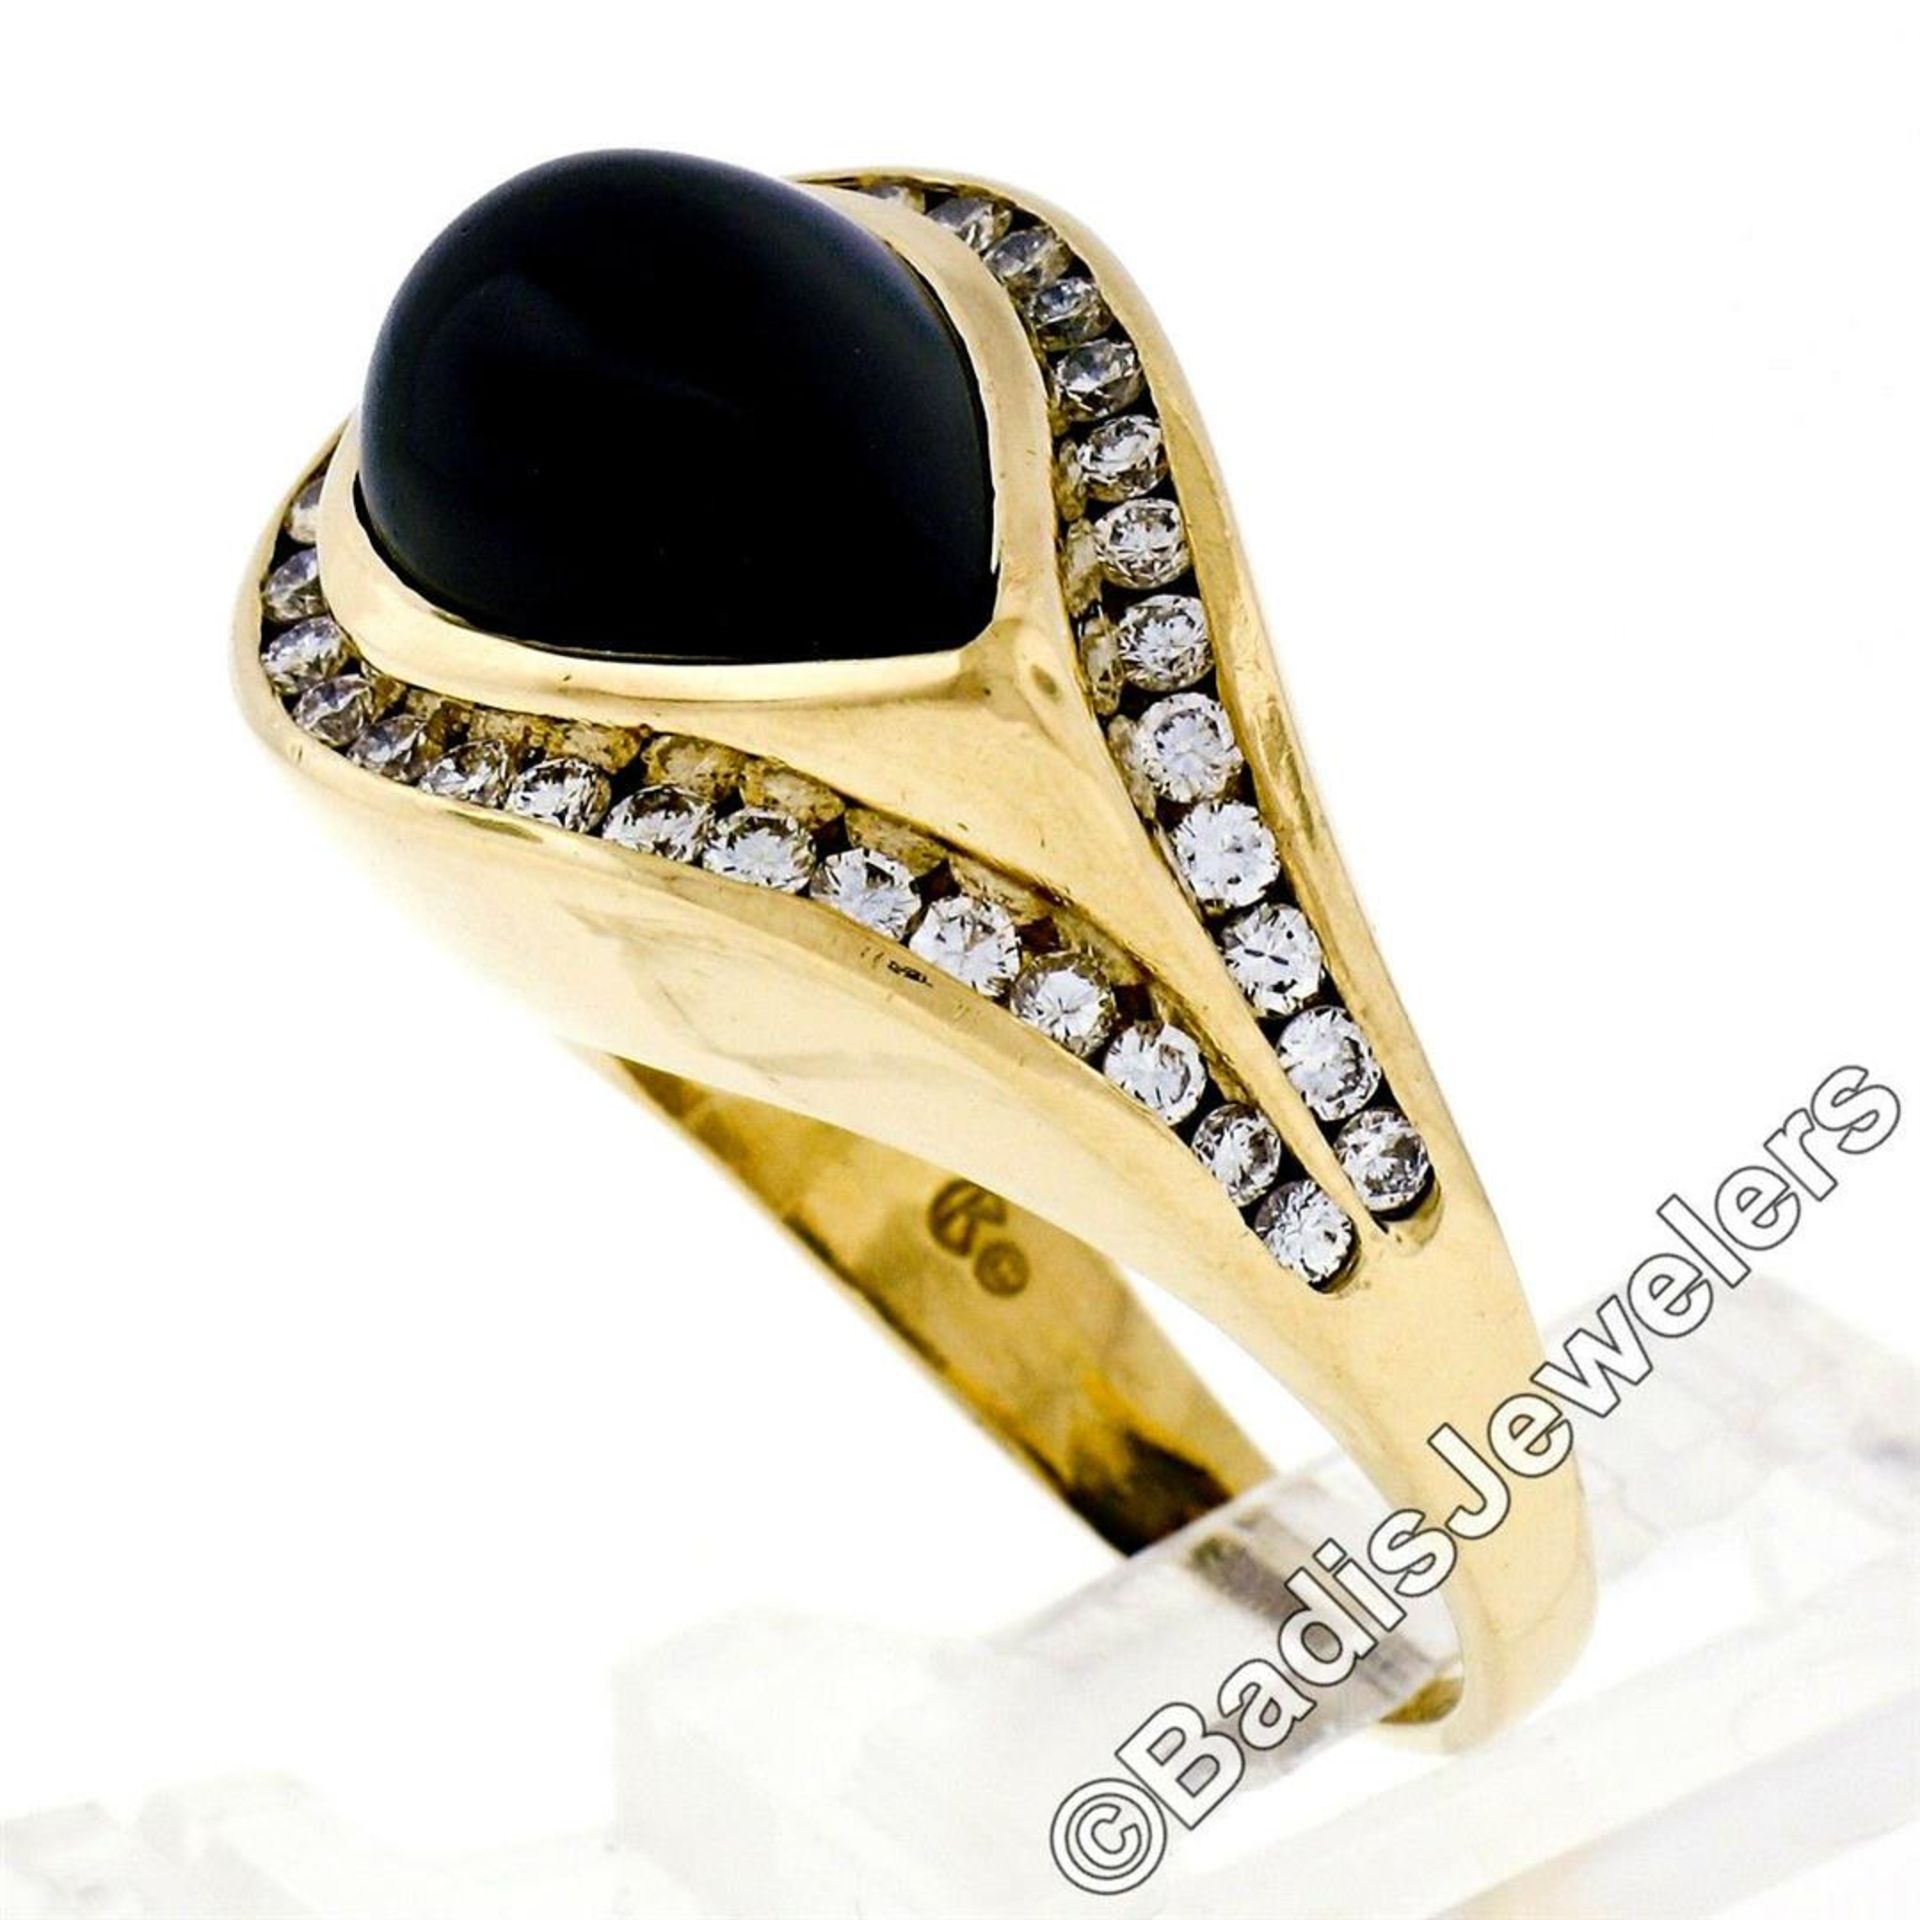 18kt Yellow Gold Pear Cabochon Black Onyx and Channel Set Diamond Ring - Image 2 of 8